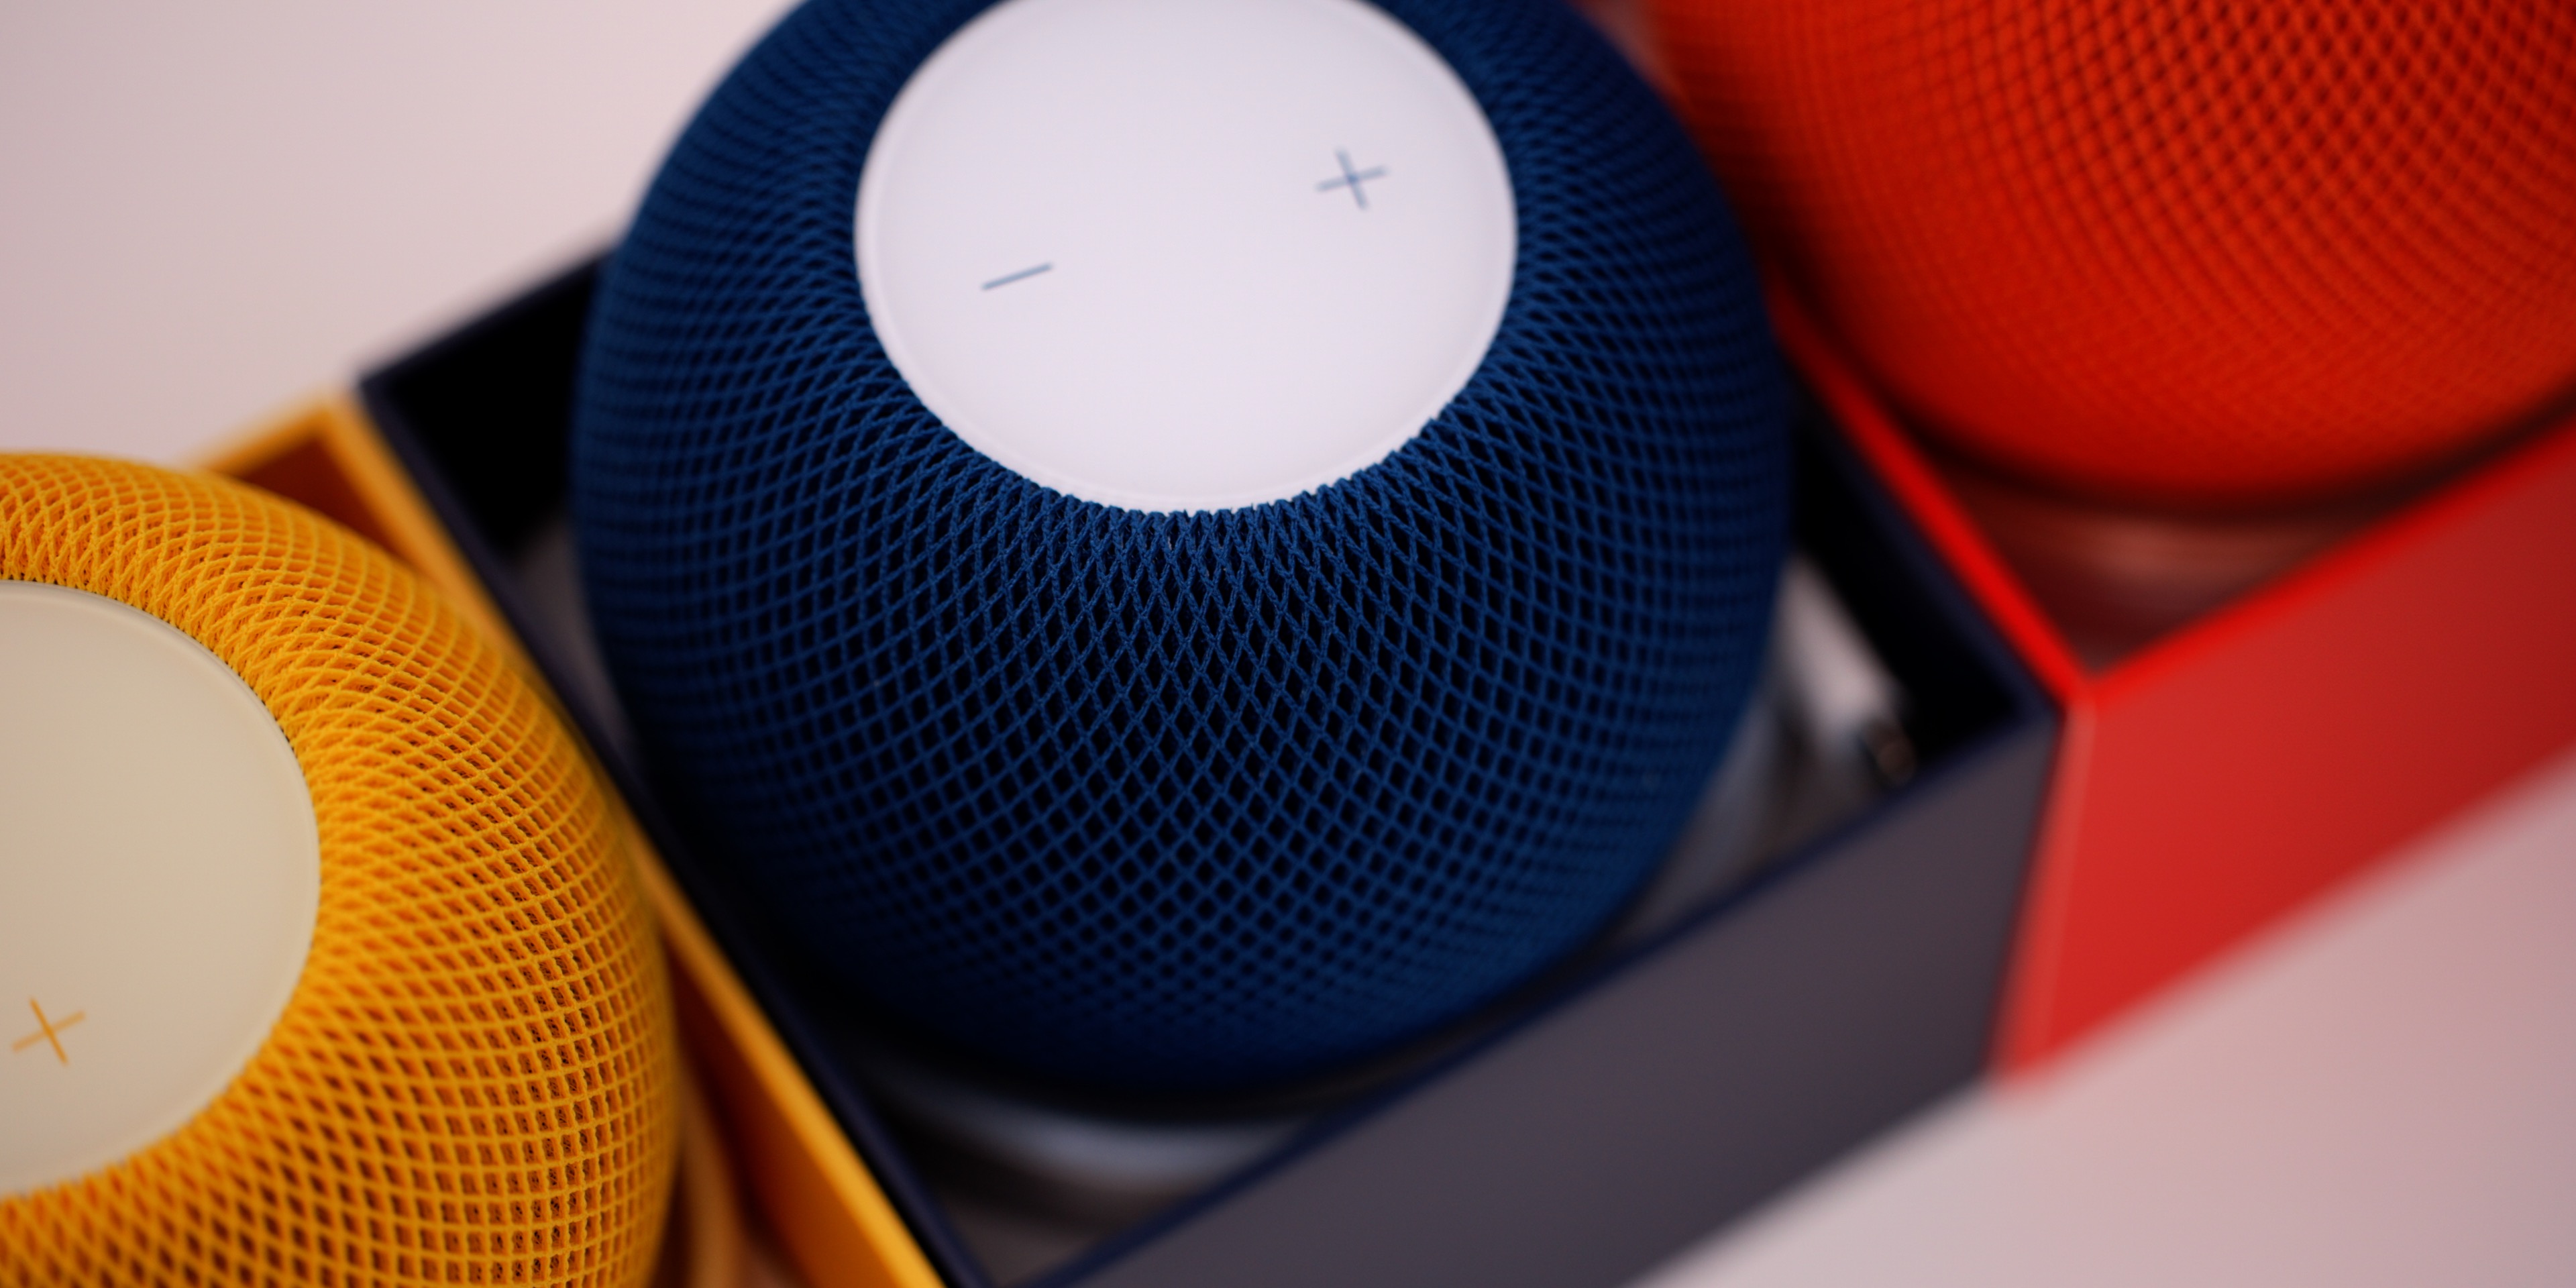 Bring one of Apple's new blue HomePod mini to your Siri setup with